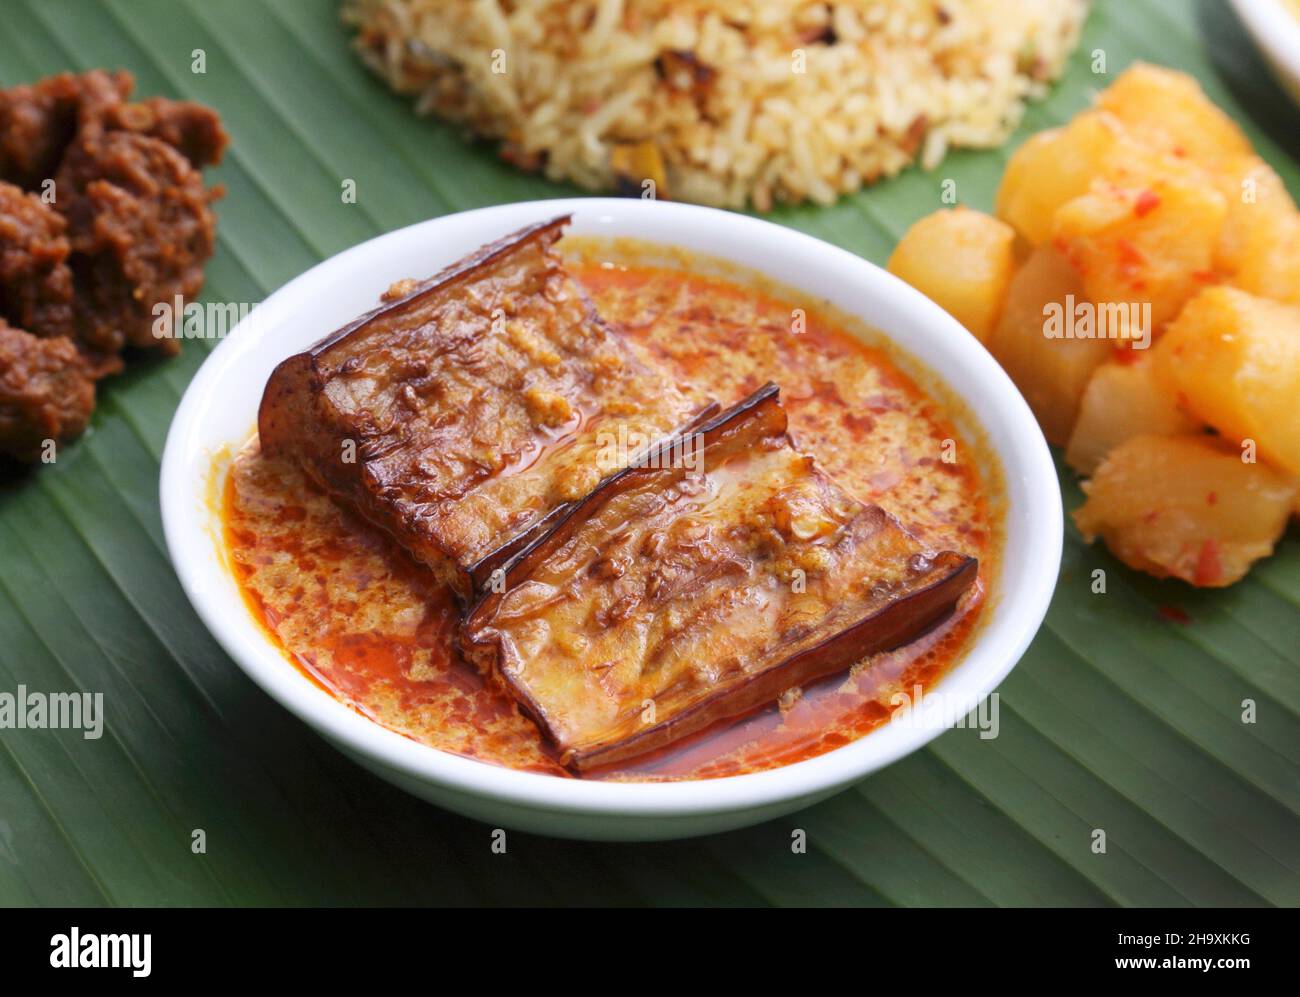 Nyonya cuisine: aubergines in a curry and coconut sauce (Malaysia) Stock Photo